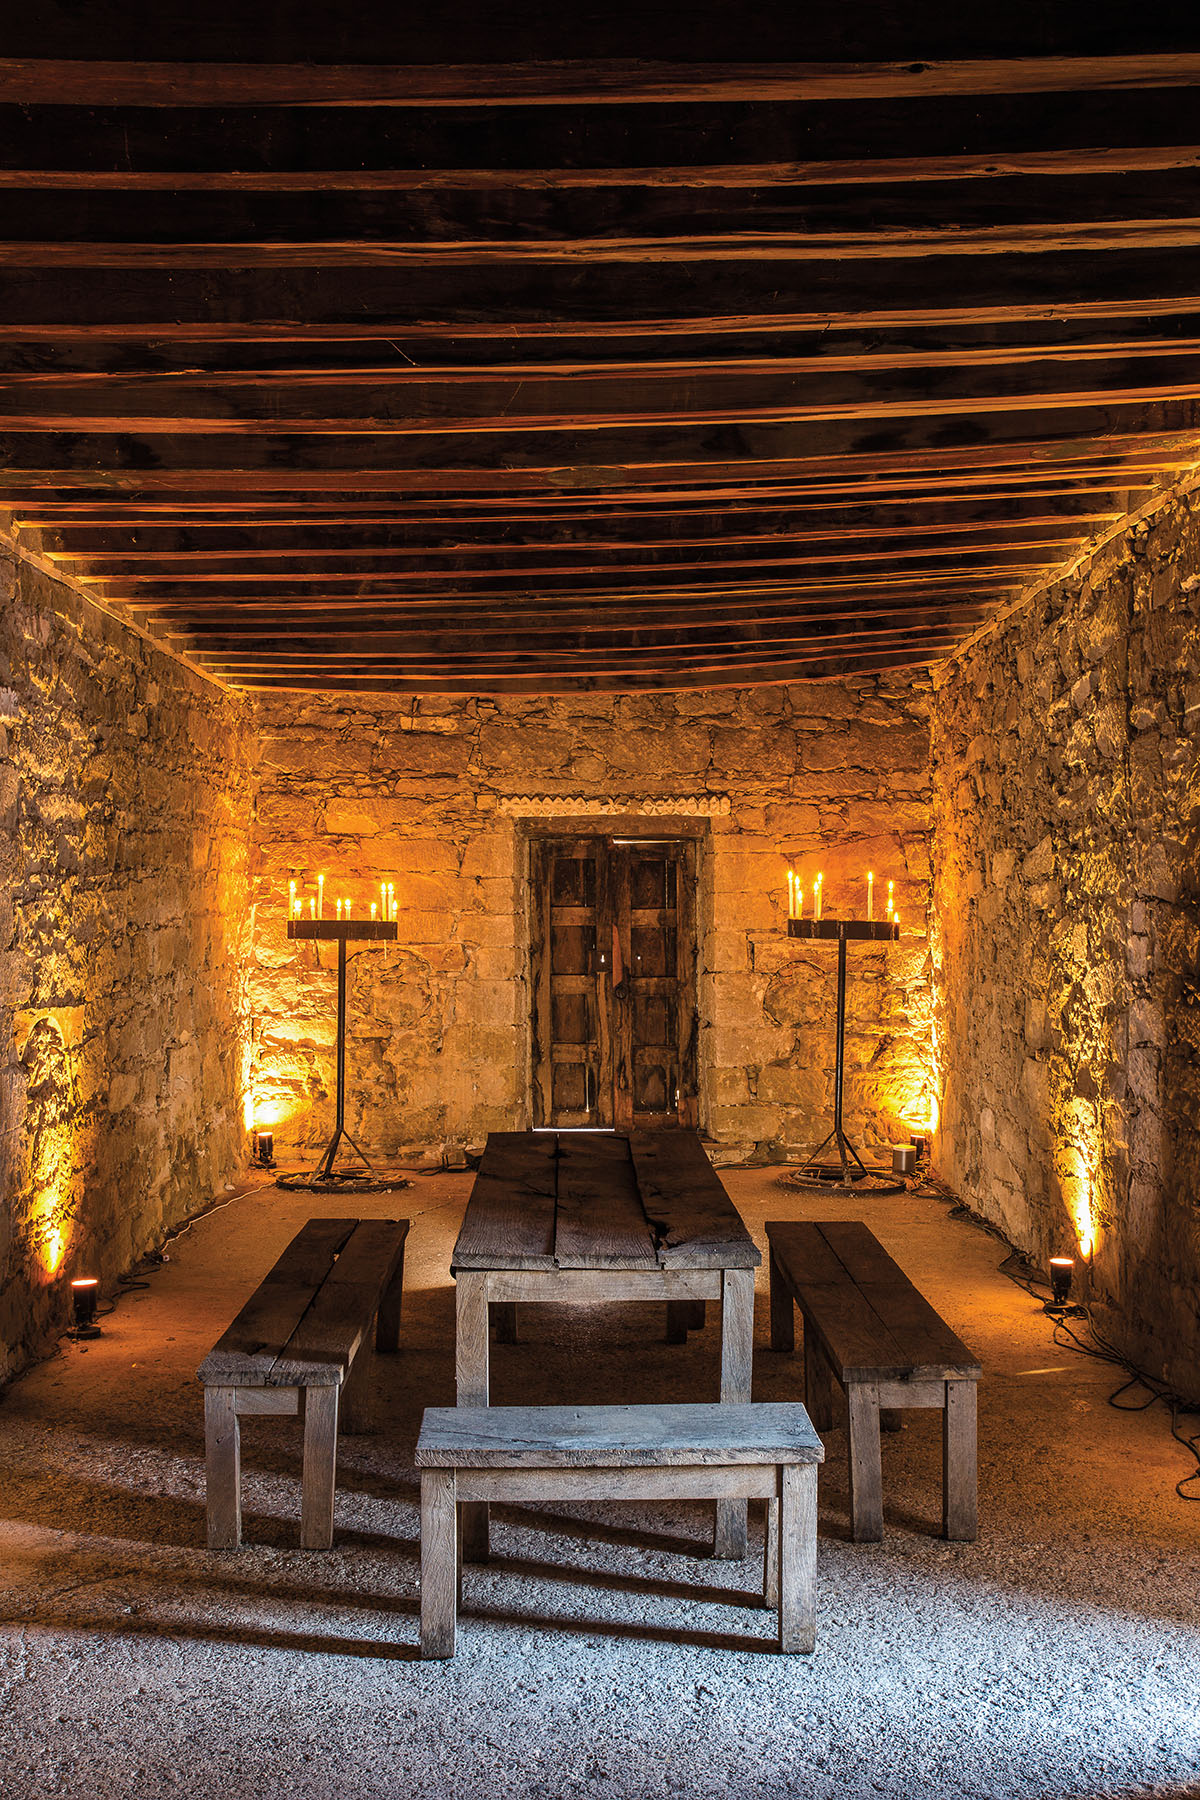 The candle-lit interior of a stone building